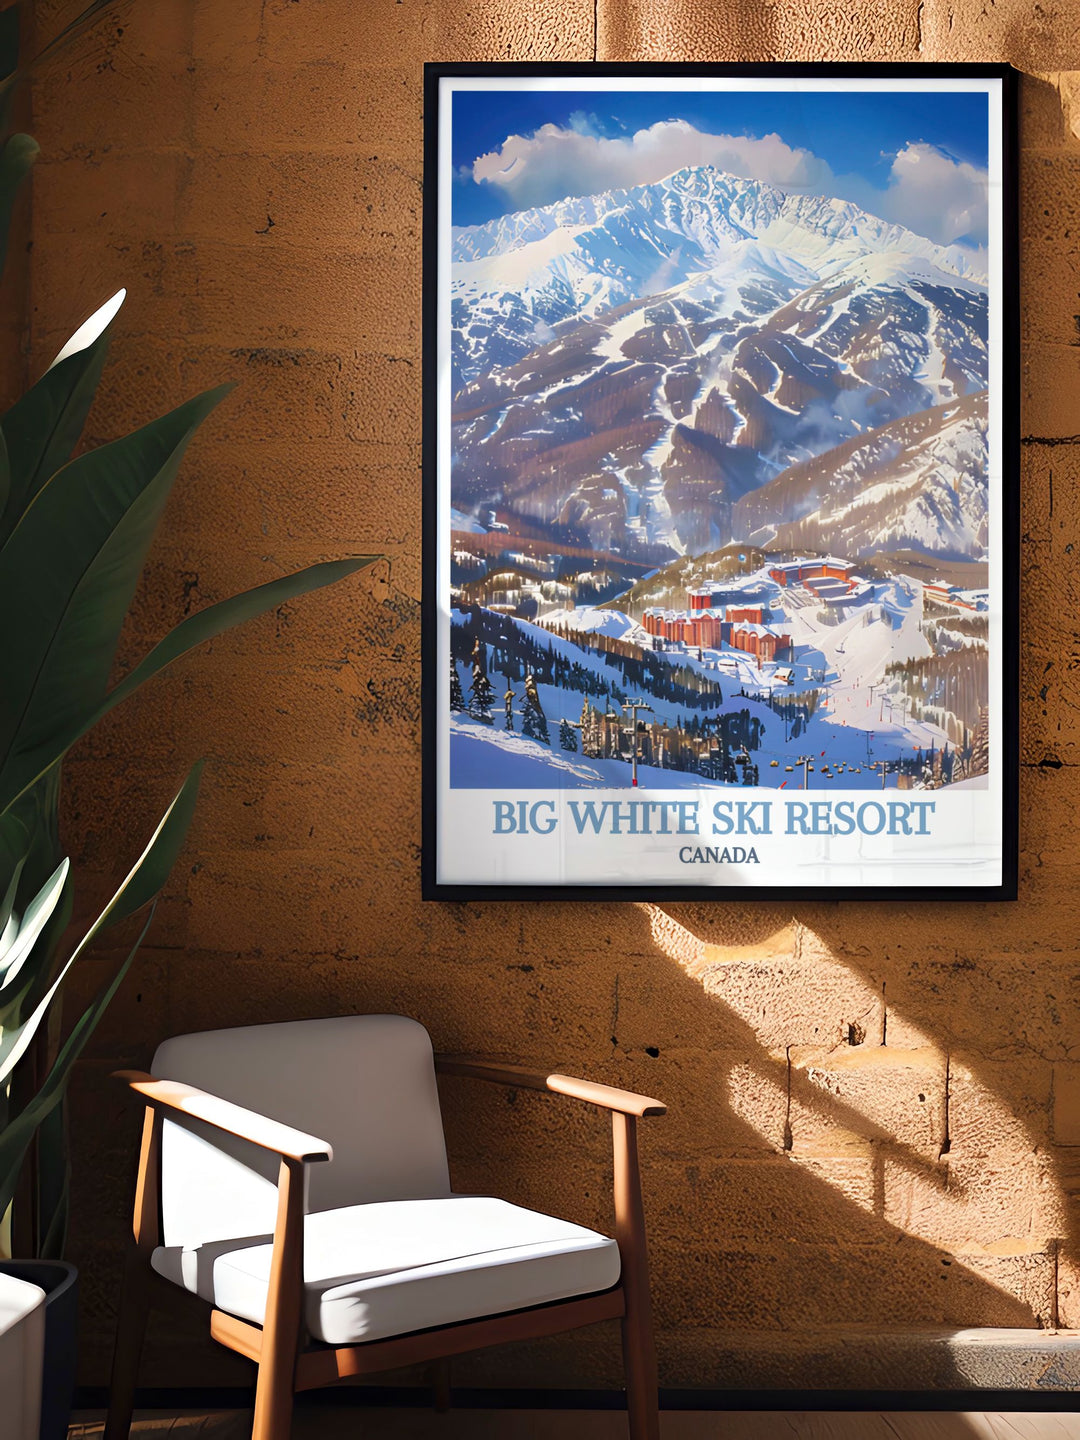 Canvas art featuring the scenic landscapes of Big White Mountain, with its stunning snow covered peaks and vibrant blue skies, offering a window into the beauty of the Rocky Mountains.